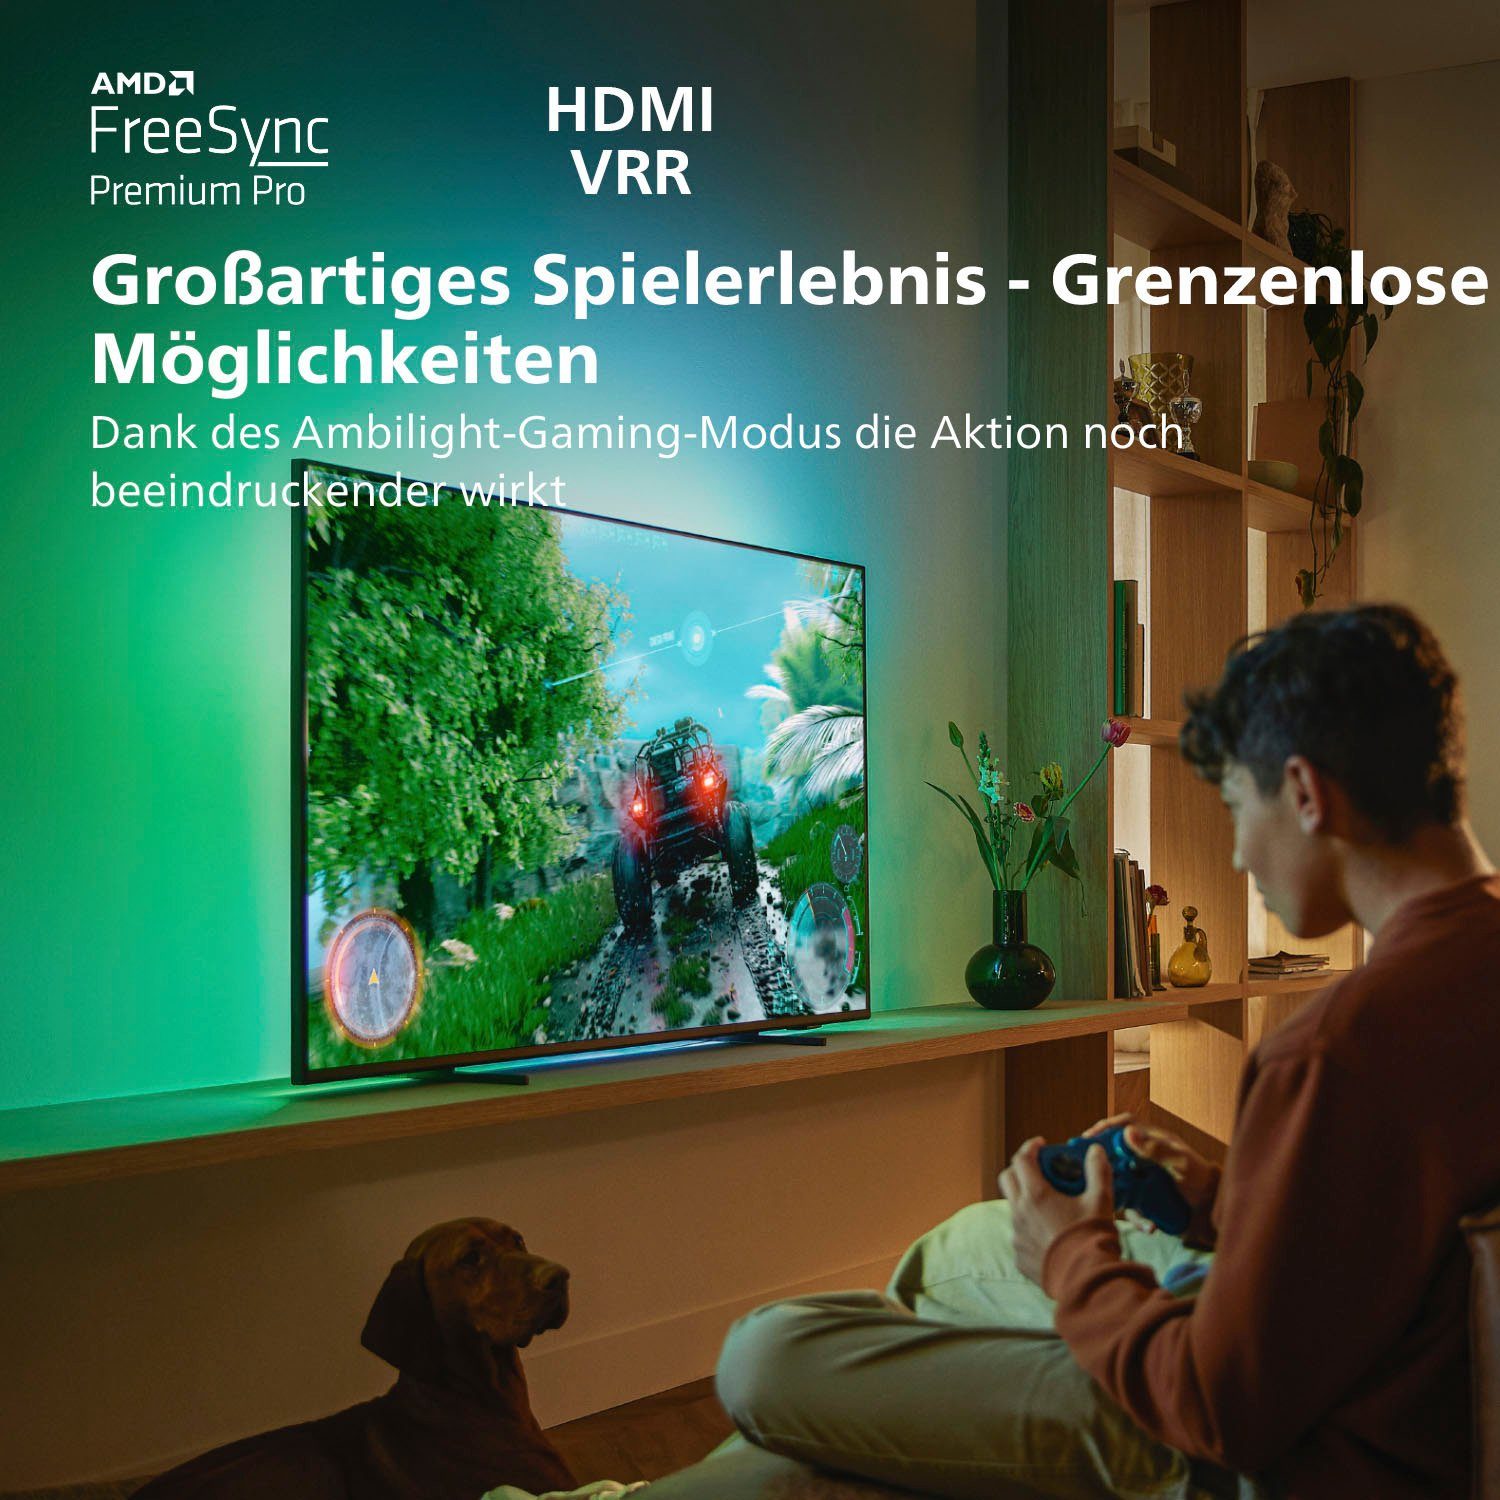 TV, LED-Fernseher 55PML9507/12 Android HD, Smart-TV) cm/55 Ultra 4K Zoll, Philips (139